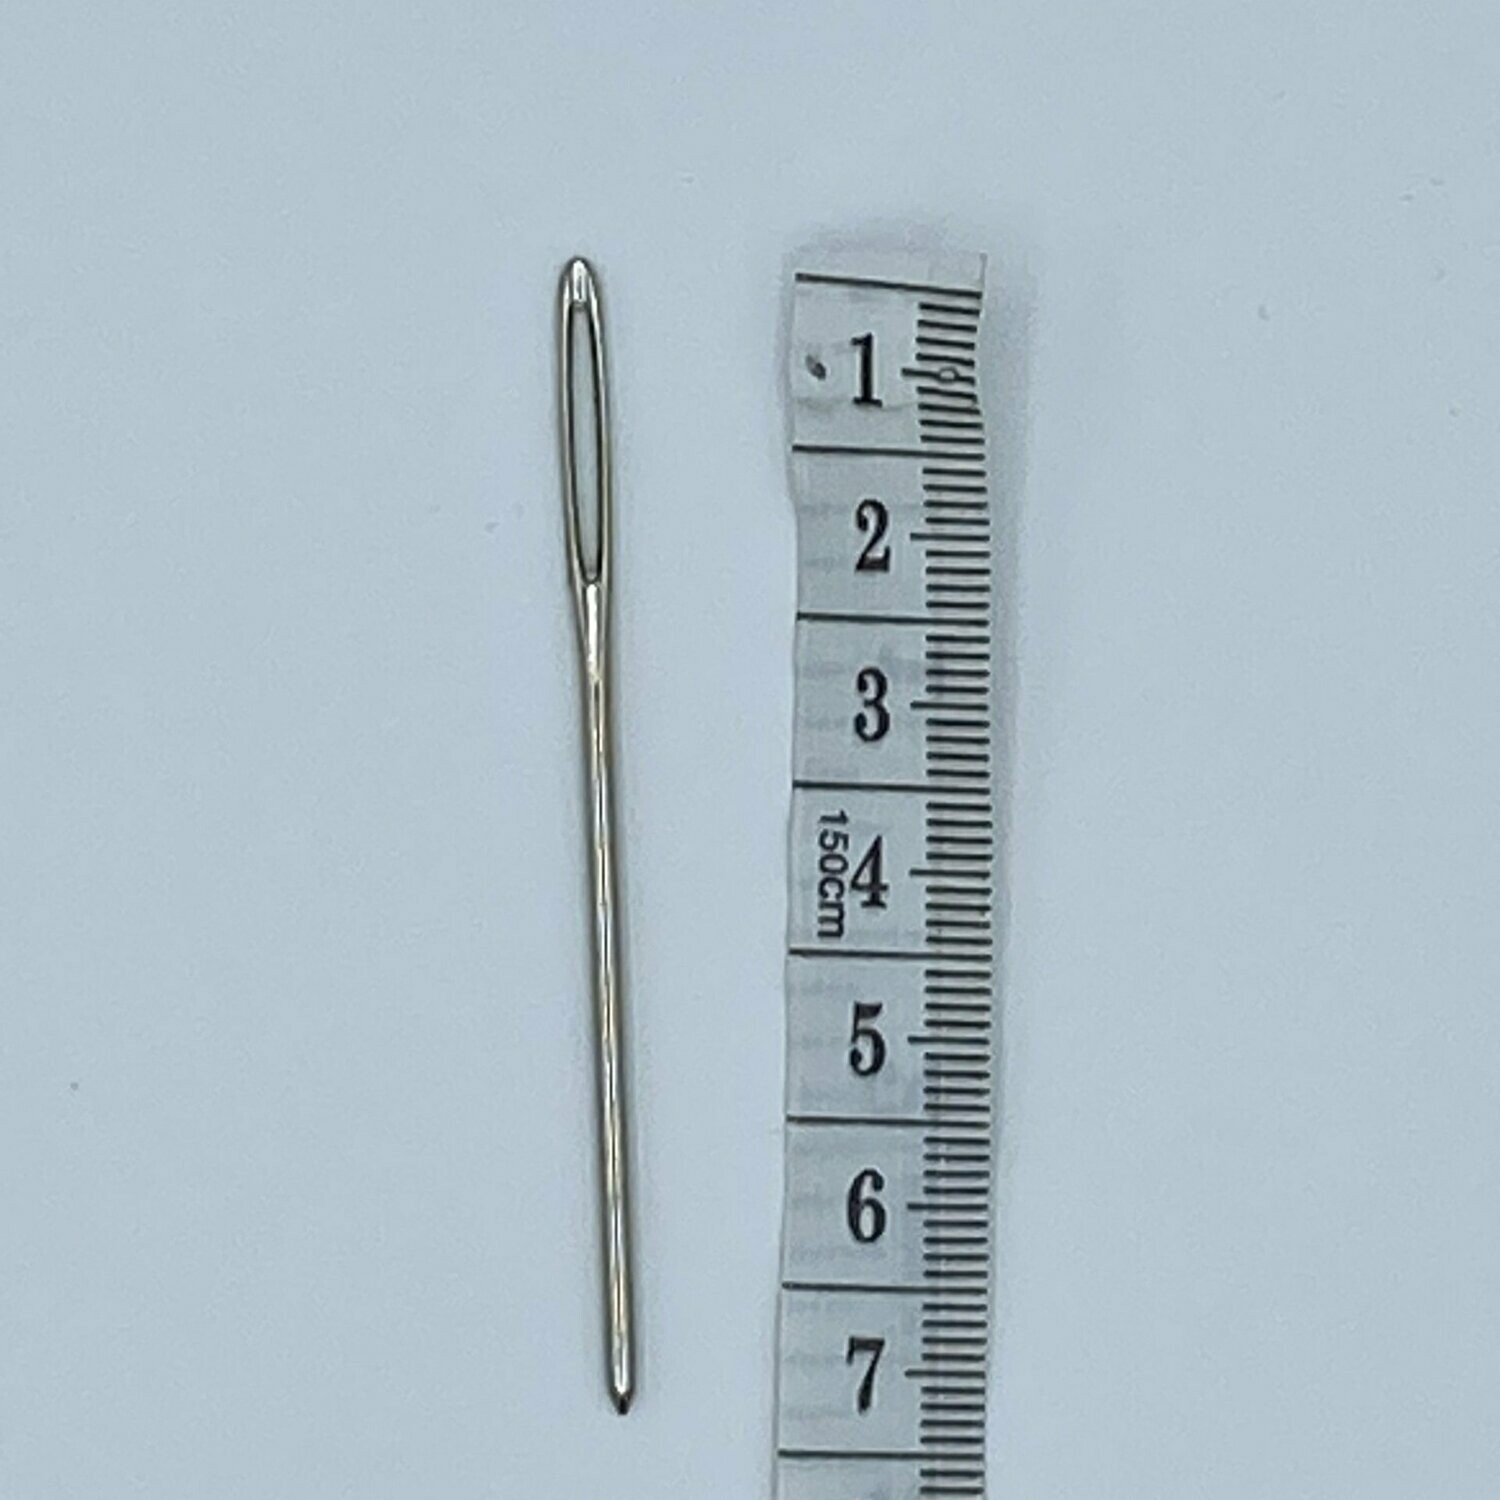 7cm long blunt tapestry needle